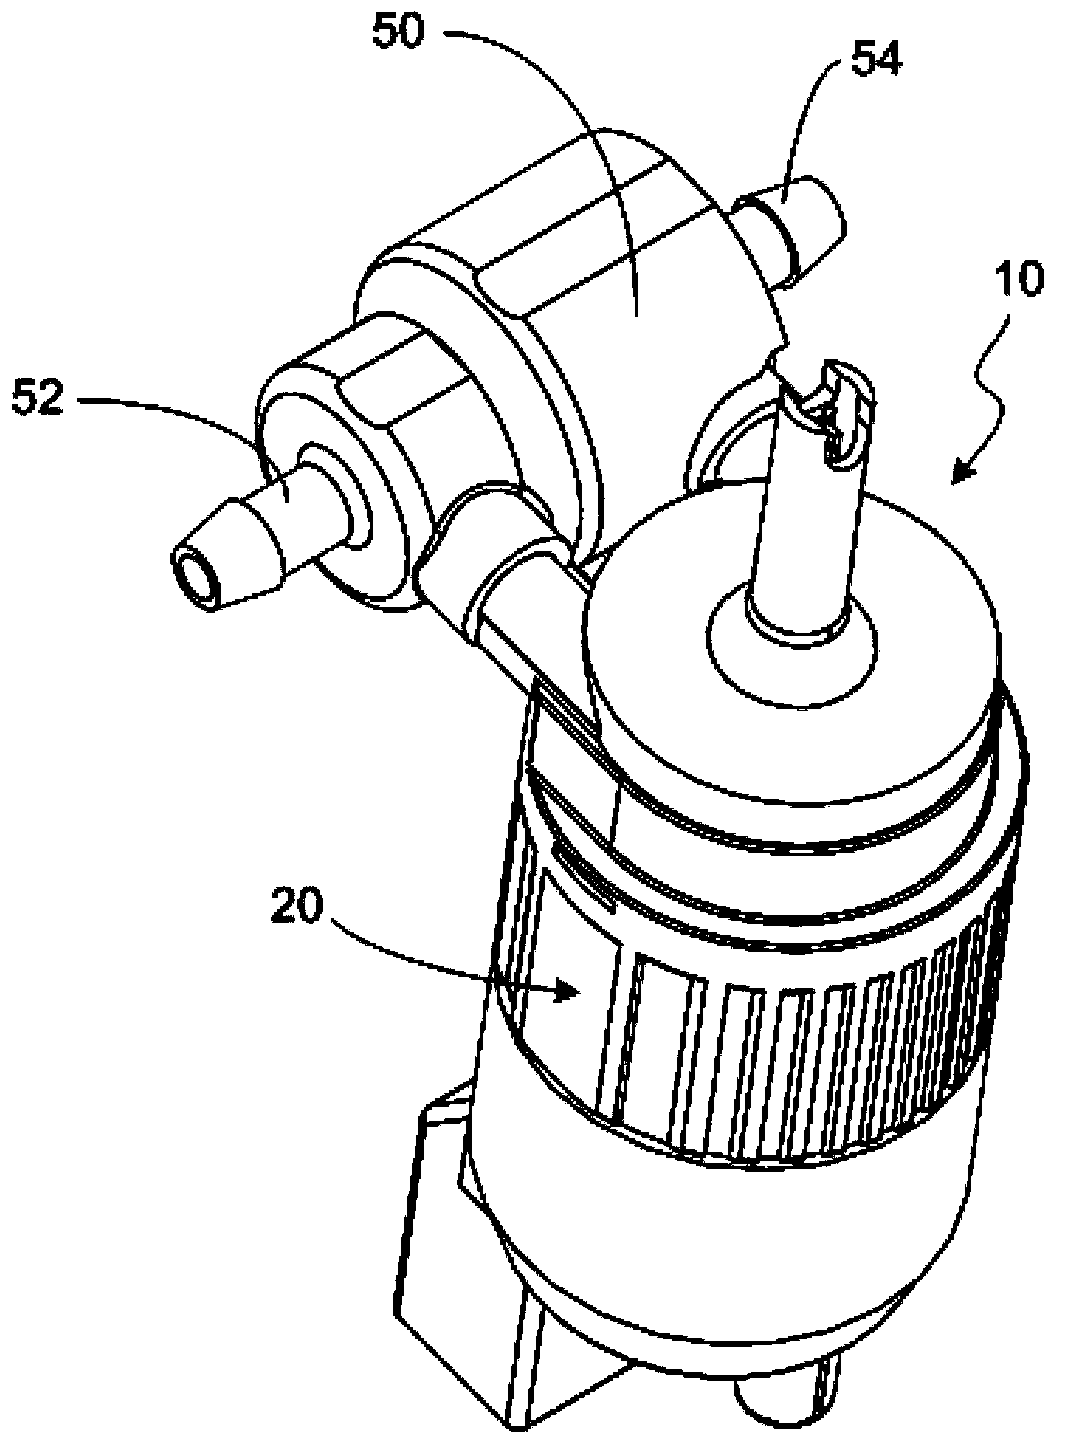 Washing pump for automobile windscreen wipers